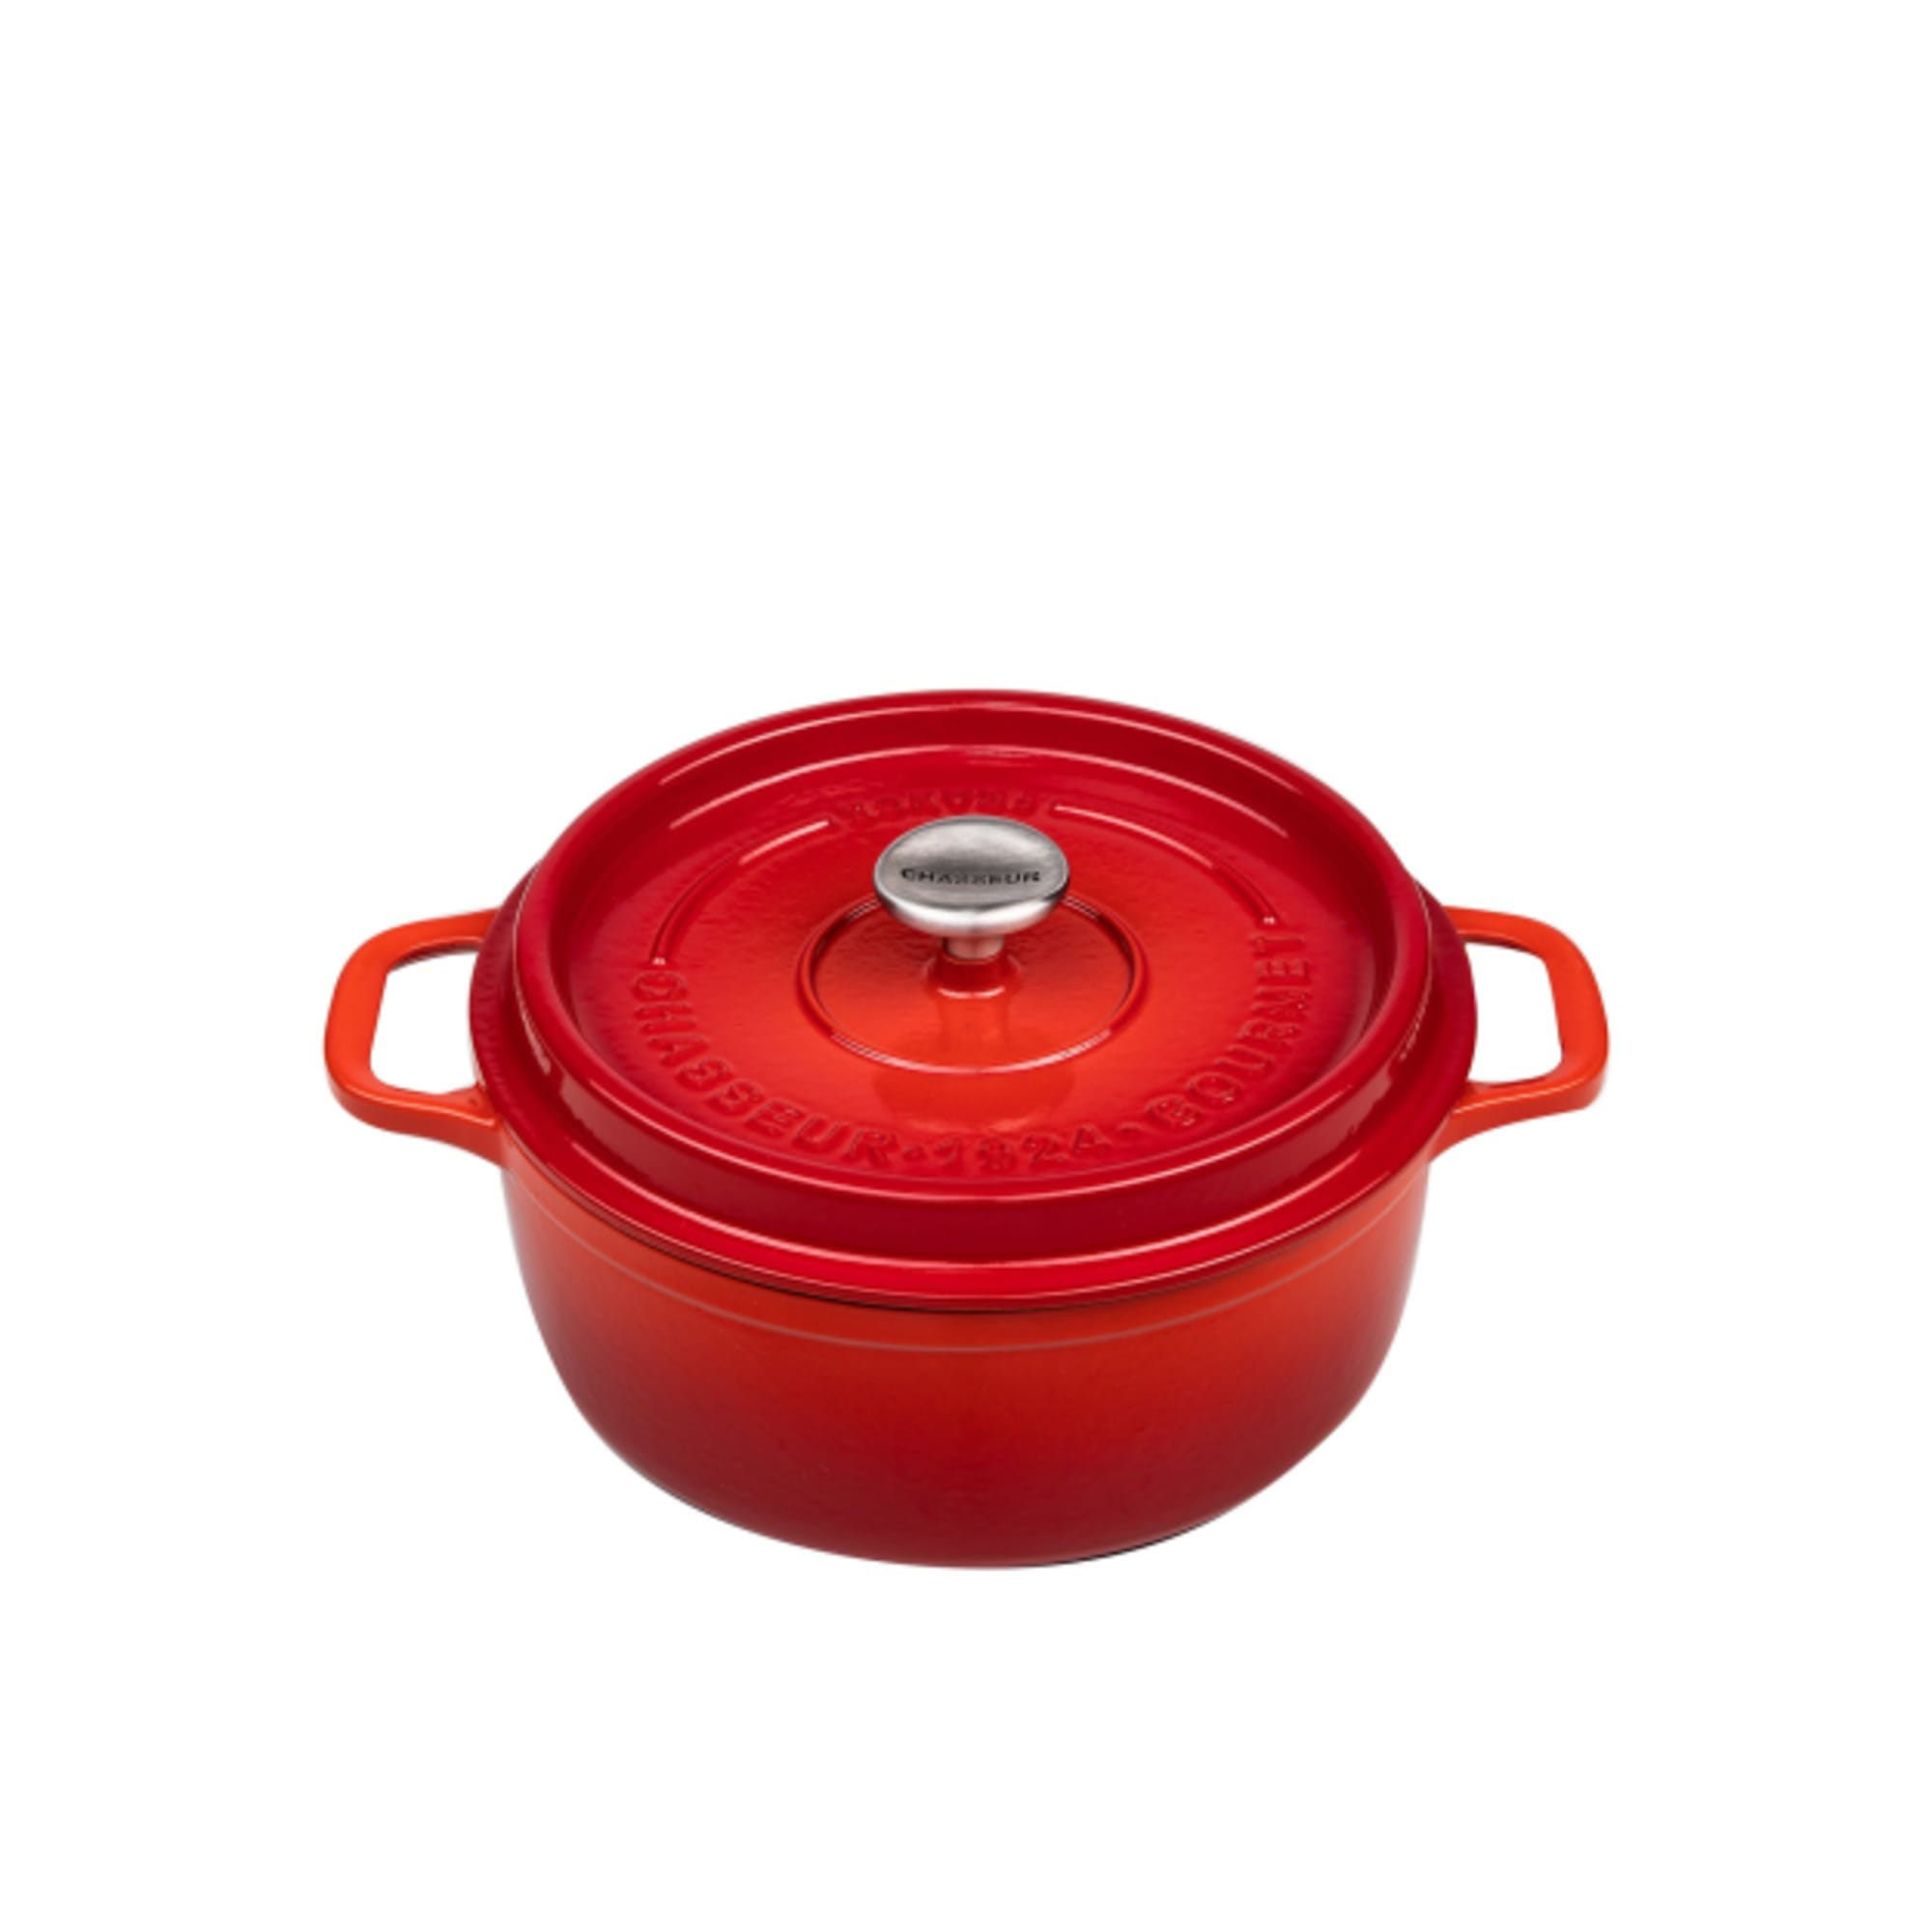 https://res.cloudinary.com/kitchenwarehouse/image/upload/c_fill,g_face,w_625/f_auto/t_PDP_2000x2000/Supplier%20Images%20/2000px/Chasseur-Gourmet-Round-French-Oven-24cm-4L-Crimson_1_2000px.jpg